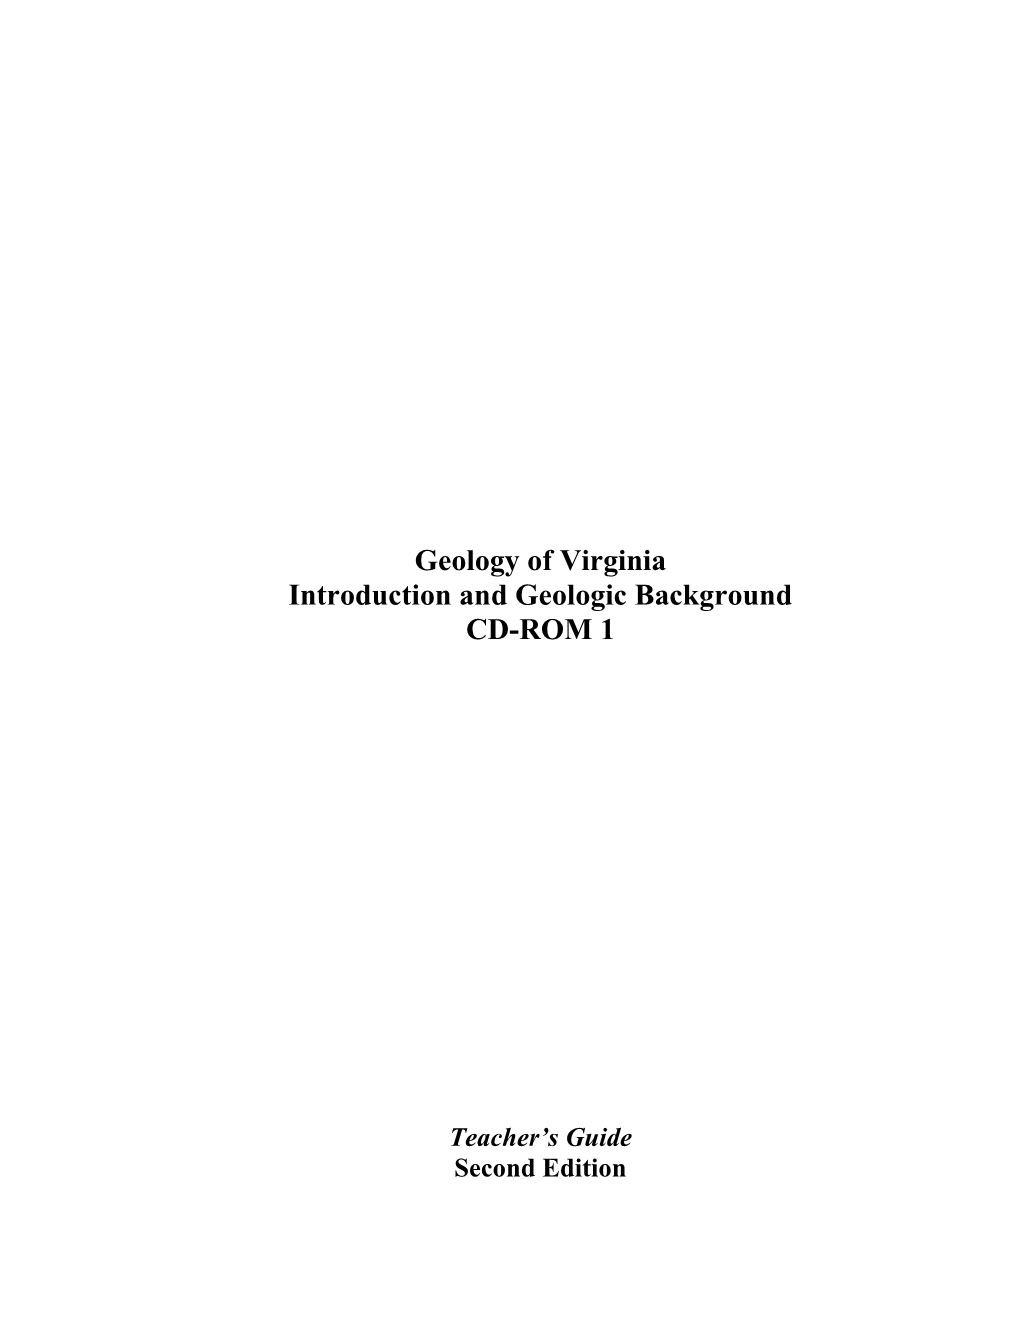 Geology of Virginia Introduction and Geologic Background CD-ROM 1